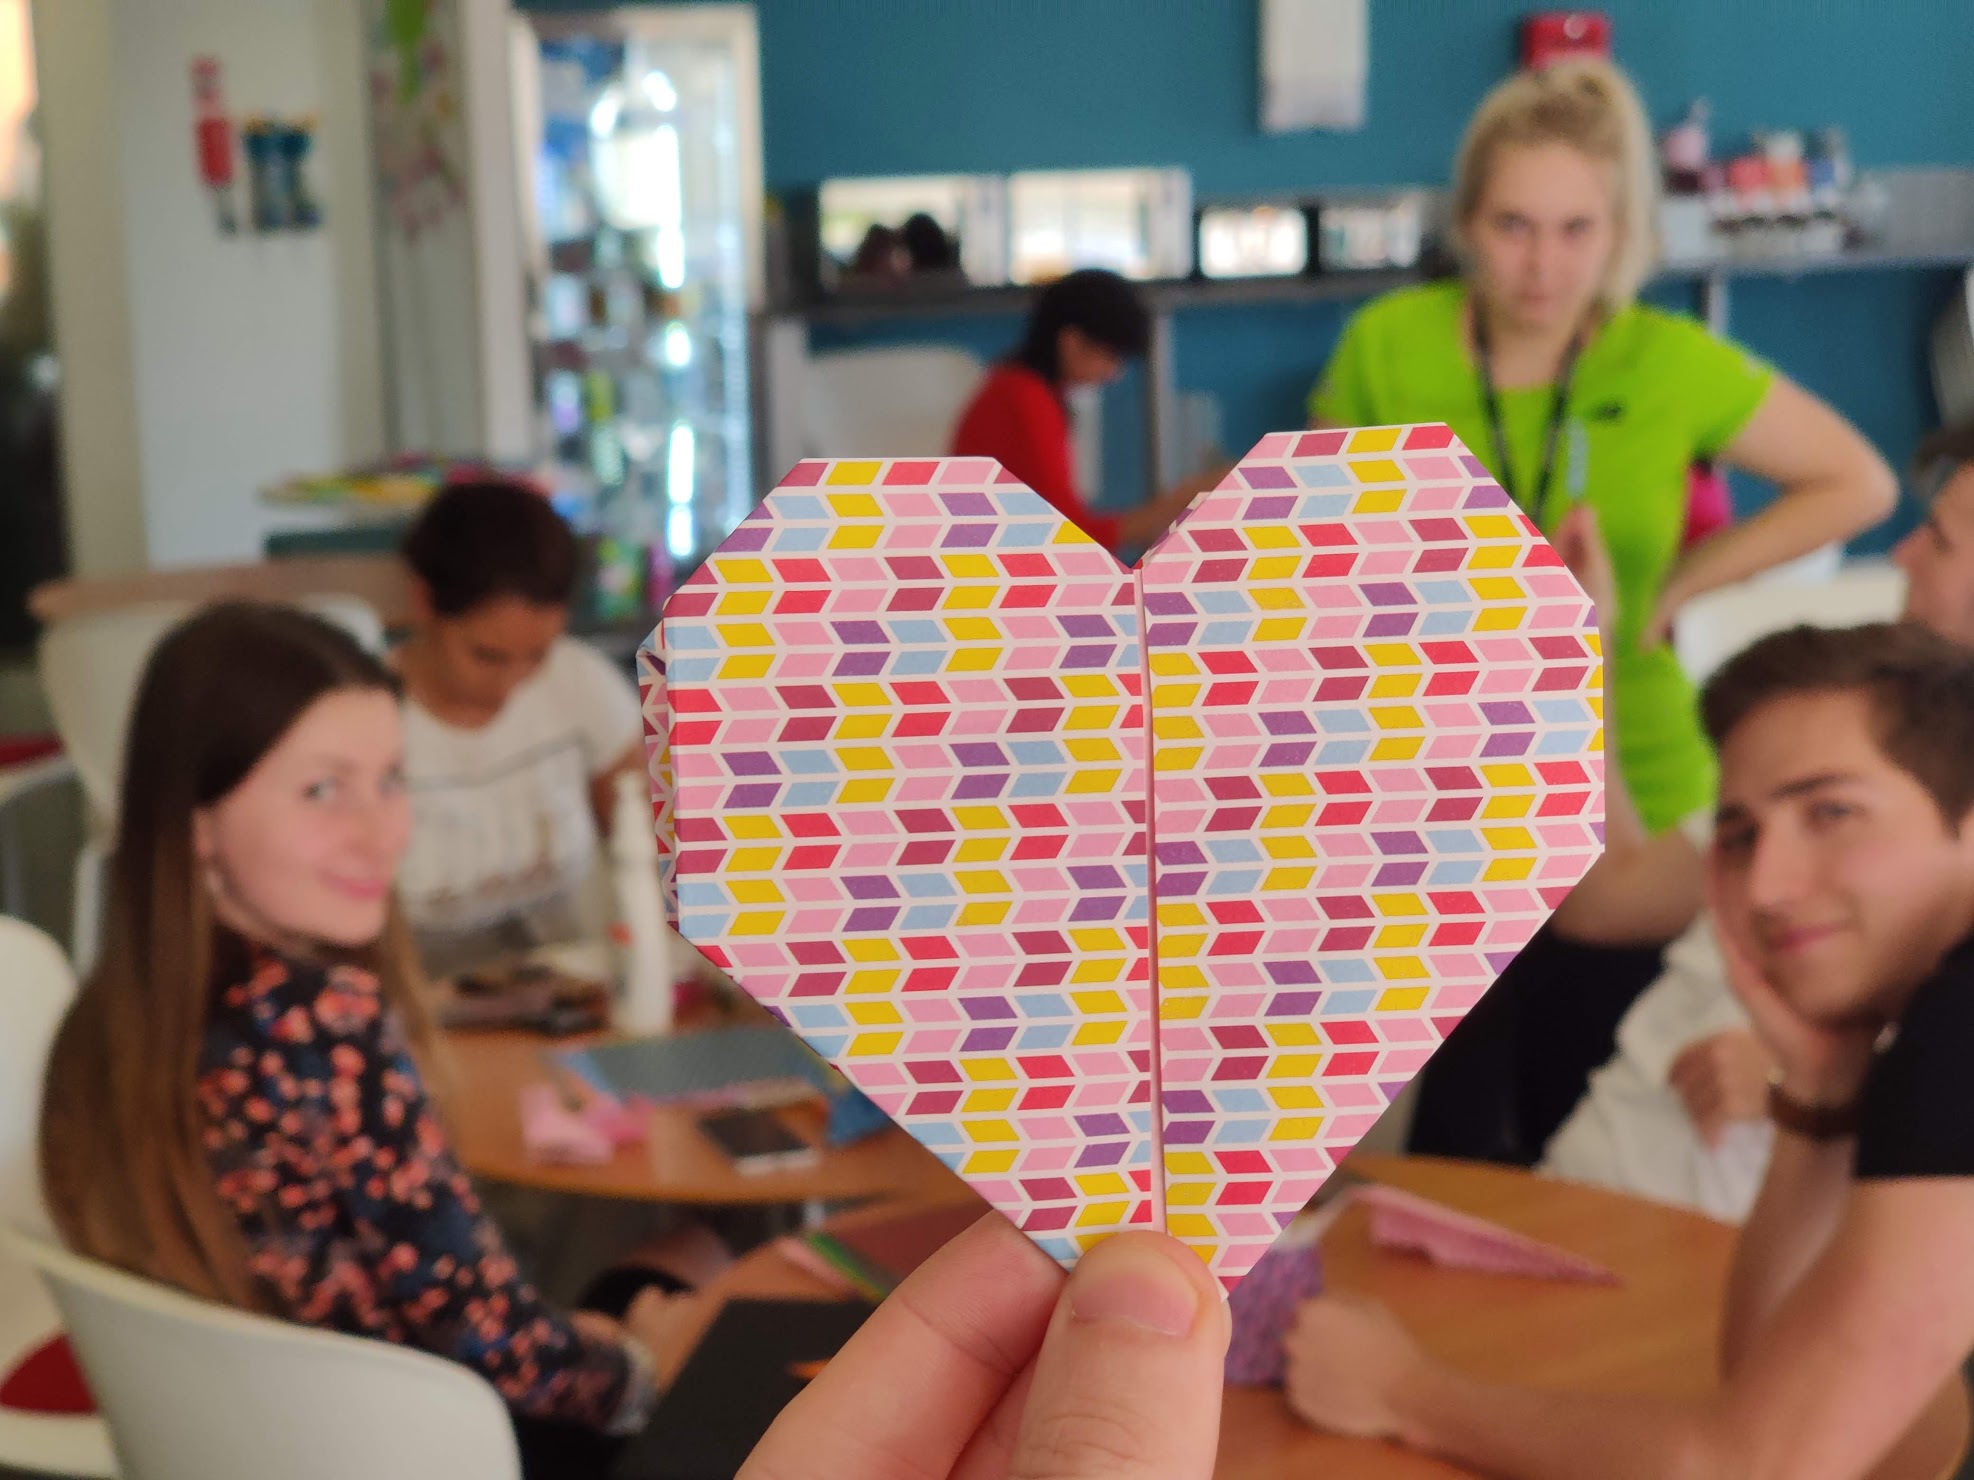 World Mental Health day activity featuring paper heart in foreground